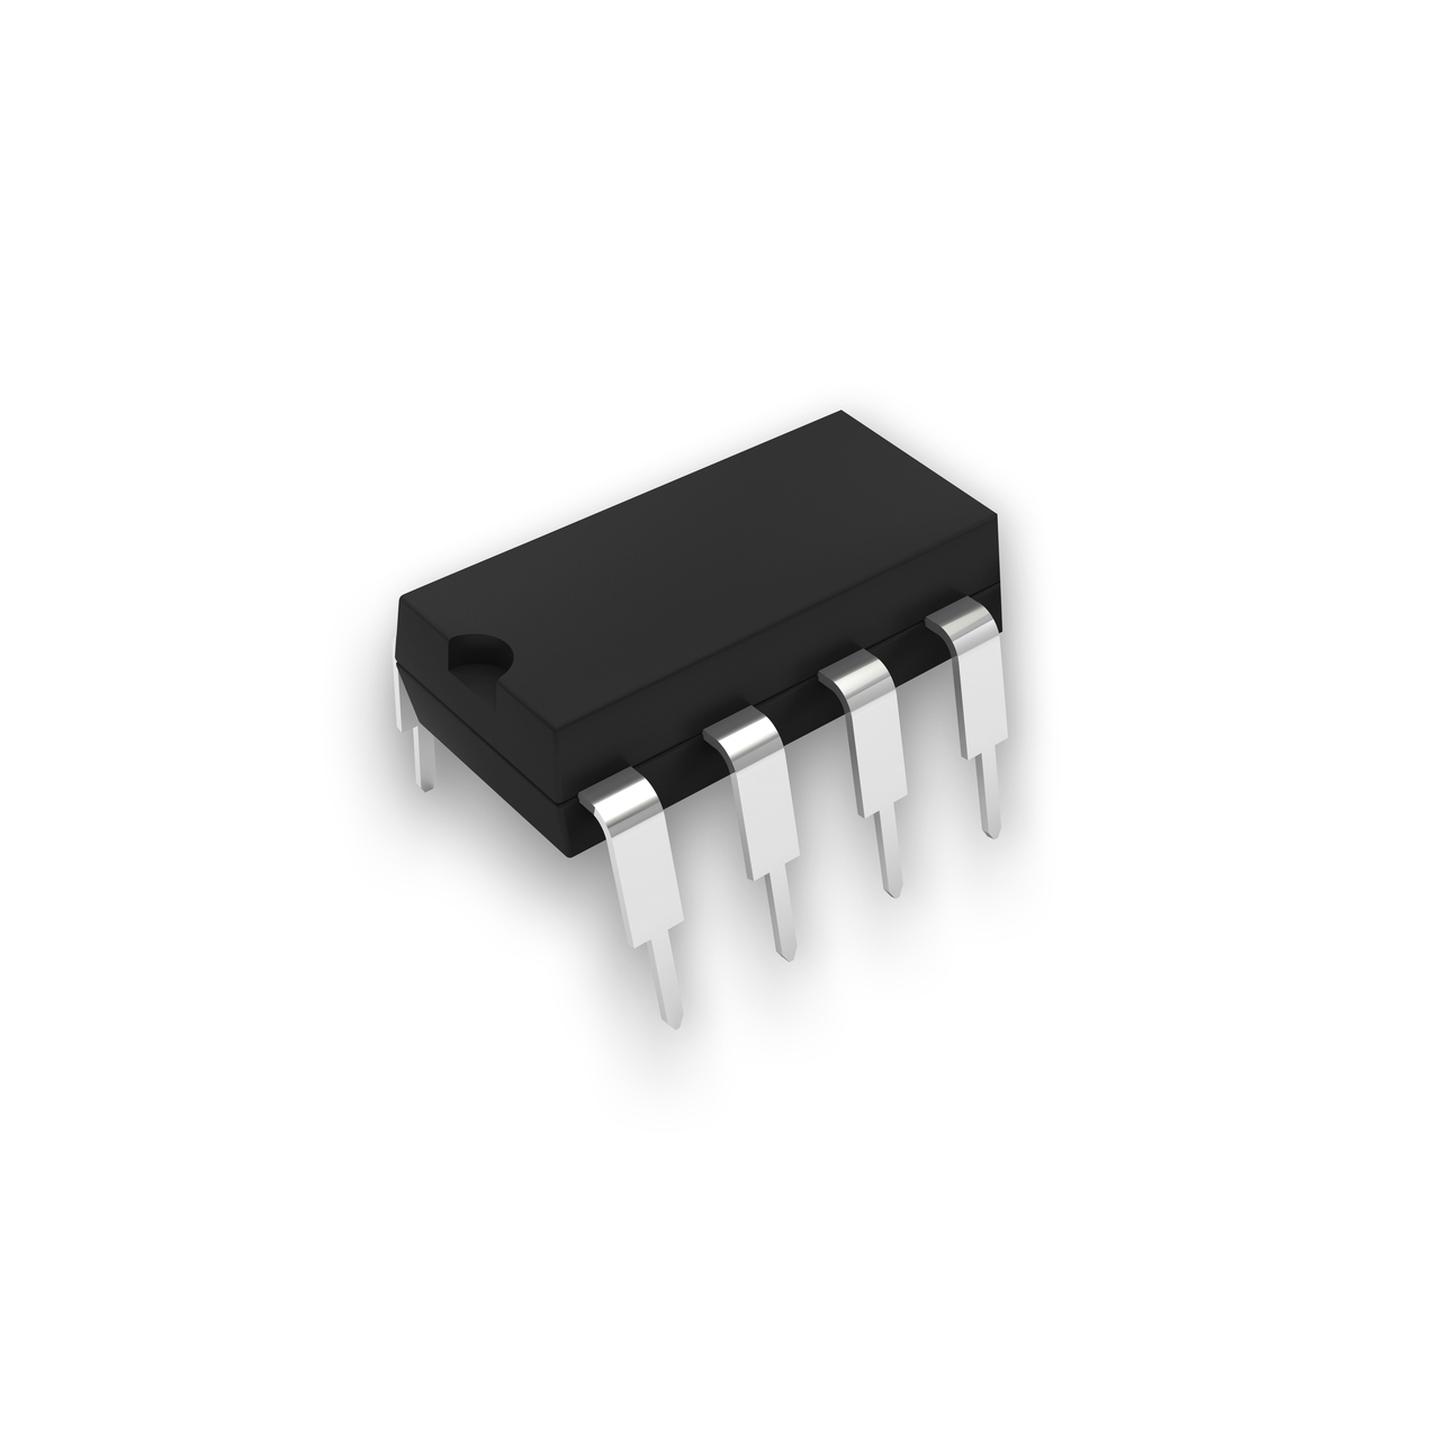 LM741 General Purpose Op-Amp Linear IC